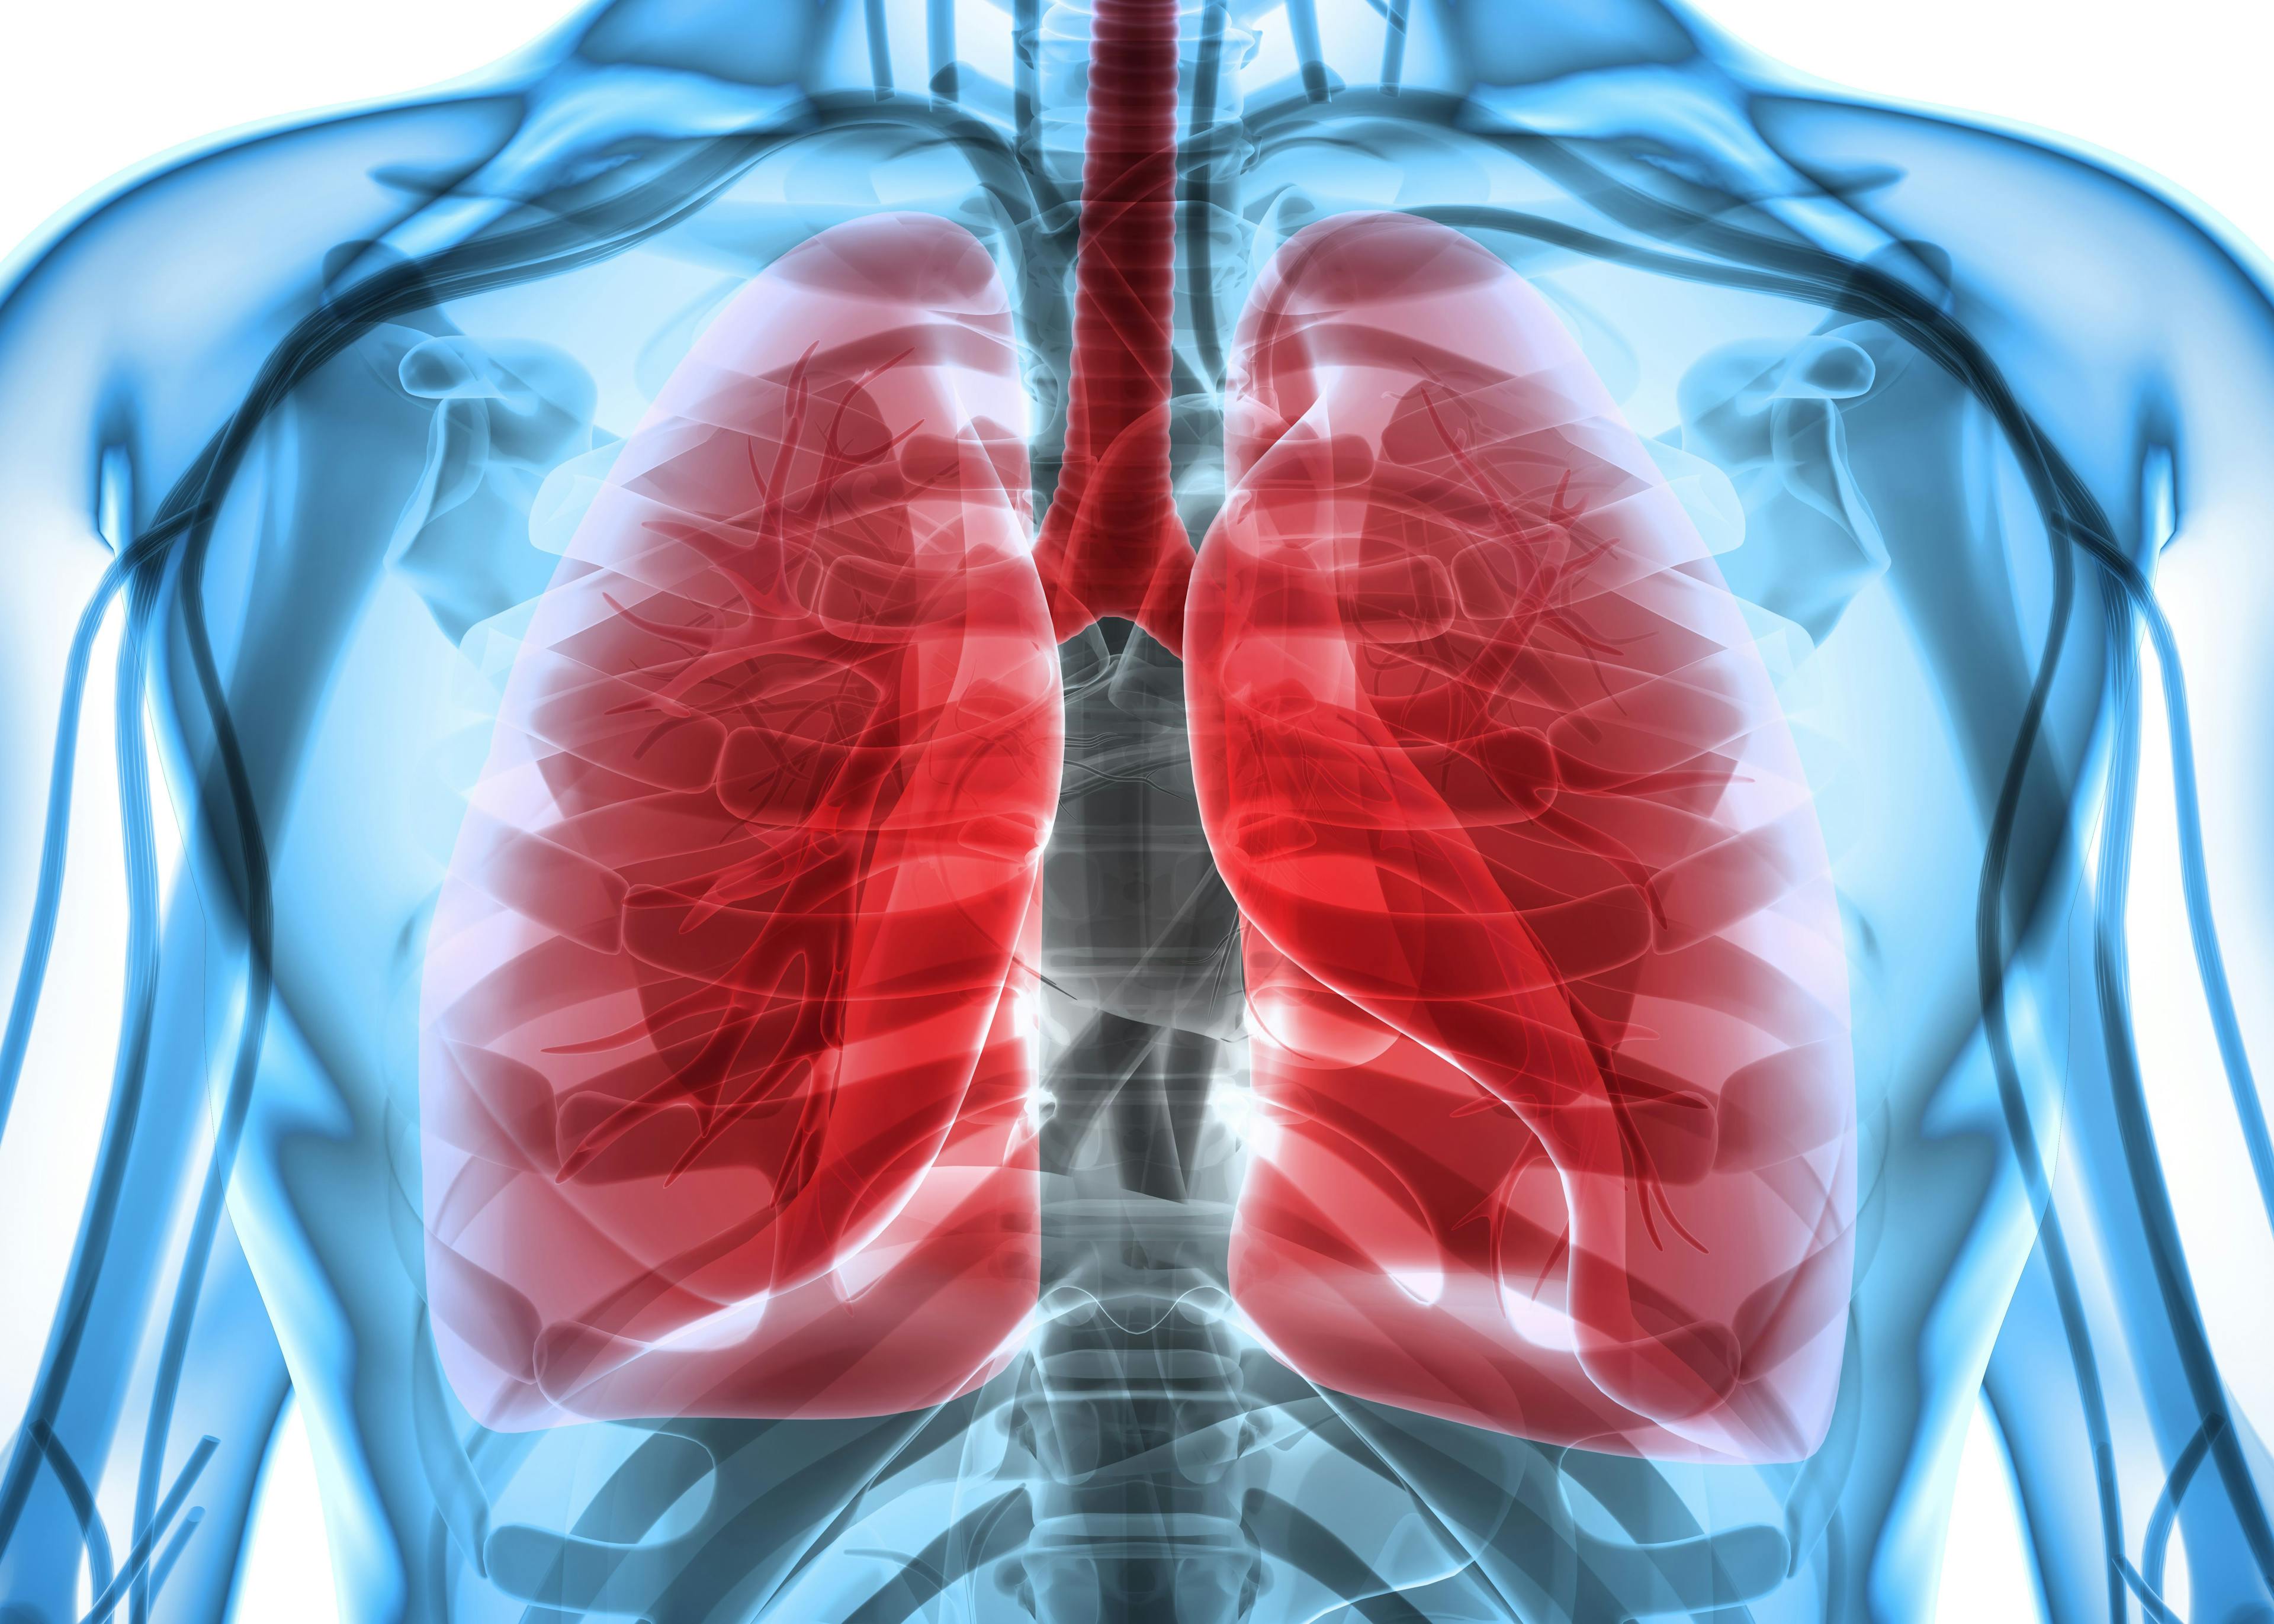 The supplemental biologics license application for cemiplimab plus chemotherapy for patients with advanced non–small cell lung cancer was based on findings from the phase 3 EMPOWER-Lung 3 study and was accepted for review by the FDA.